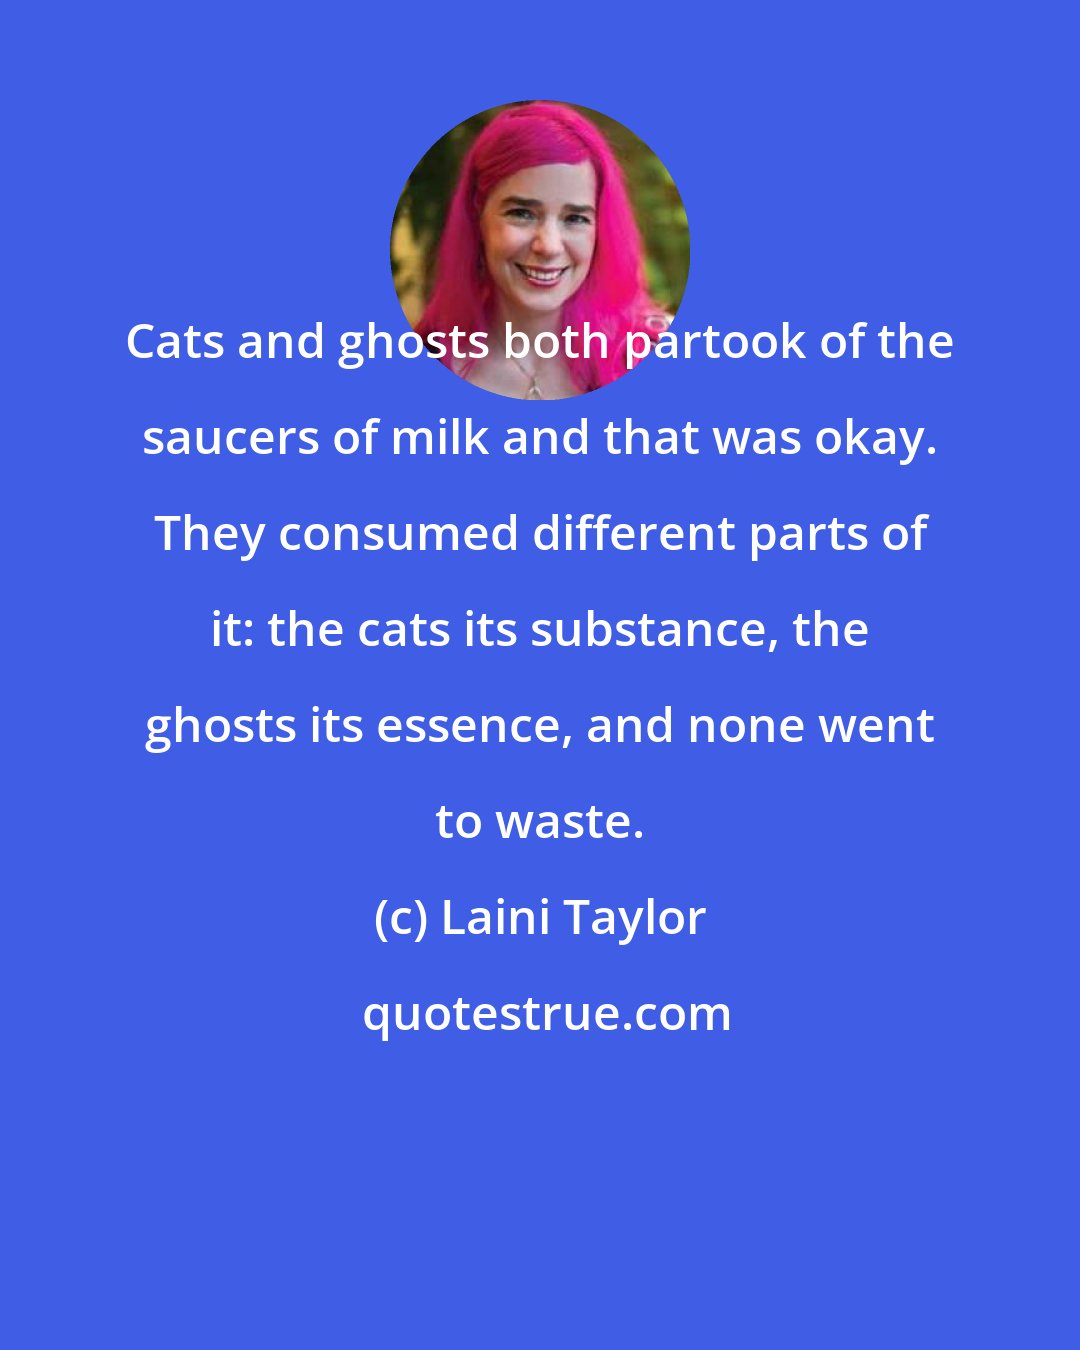 Laini Taylor: Cats and ghosts both partook of the saucers of milk and that was okay. They consumed different parts of it: the cats its substance, the ghosts its essence, and none went to waste.